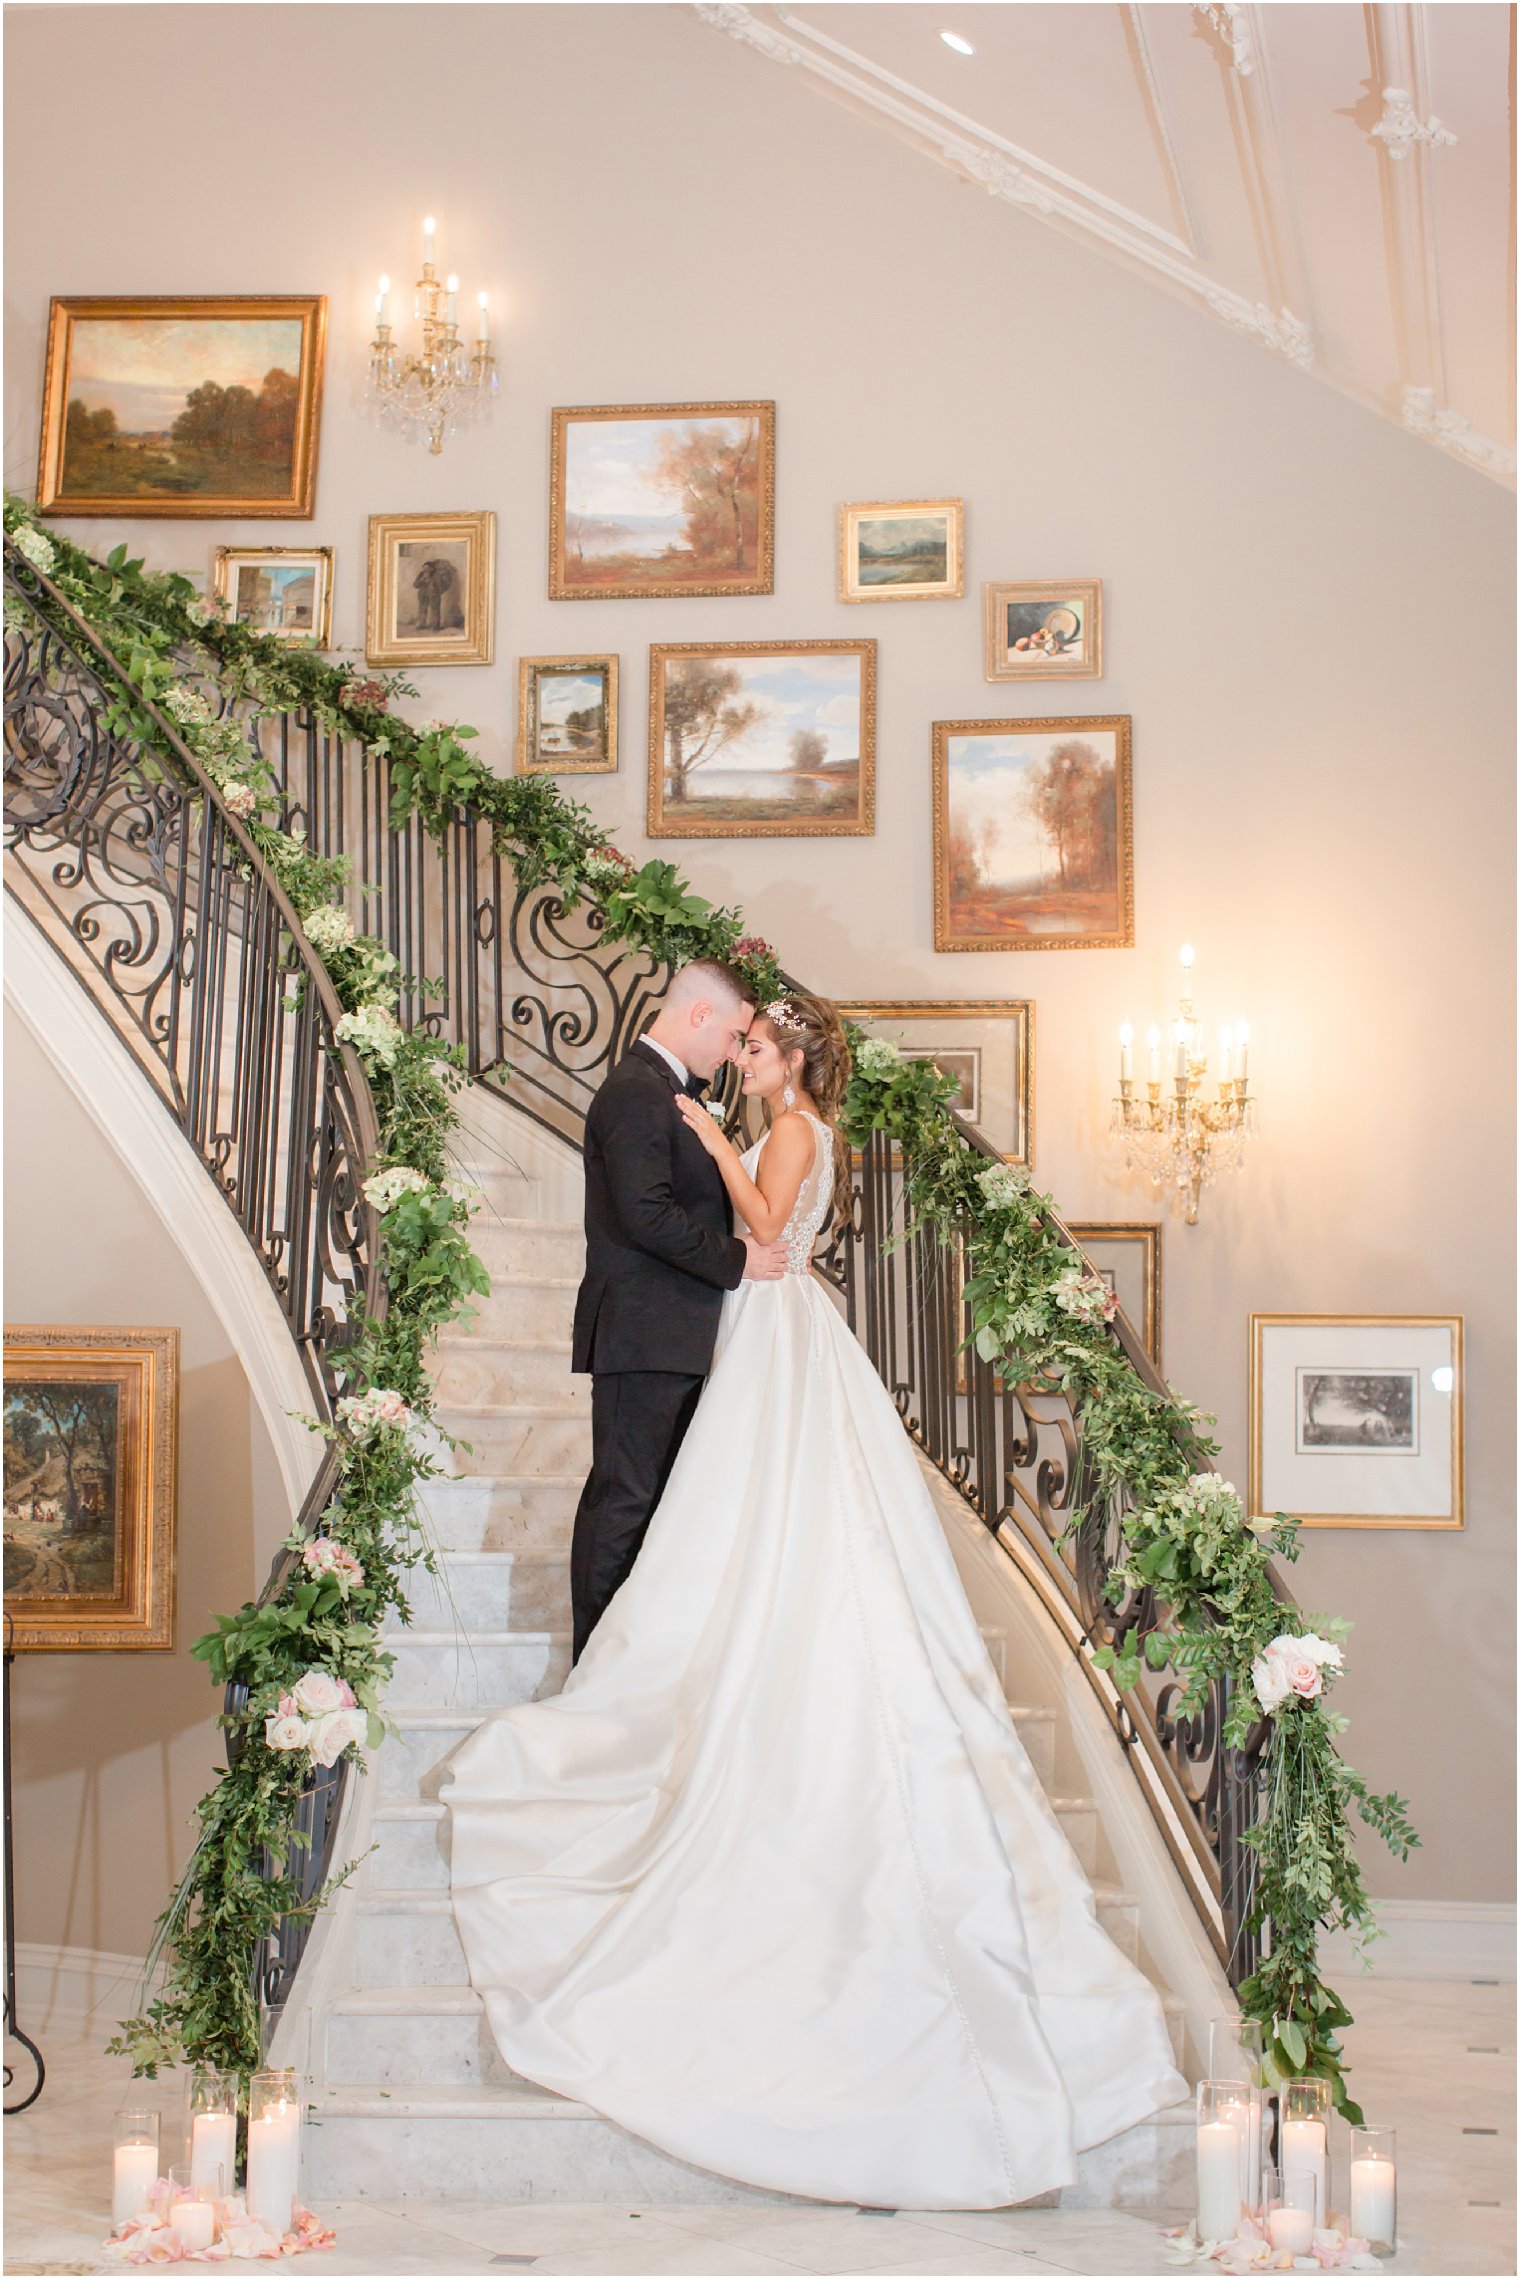 Elegant wedding portrait on the staircase at Park Chateau | Park Chateau Wedding Photography